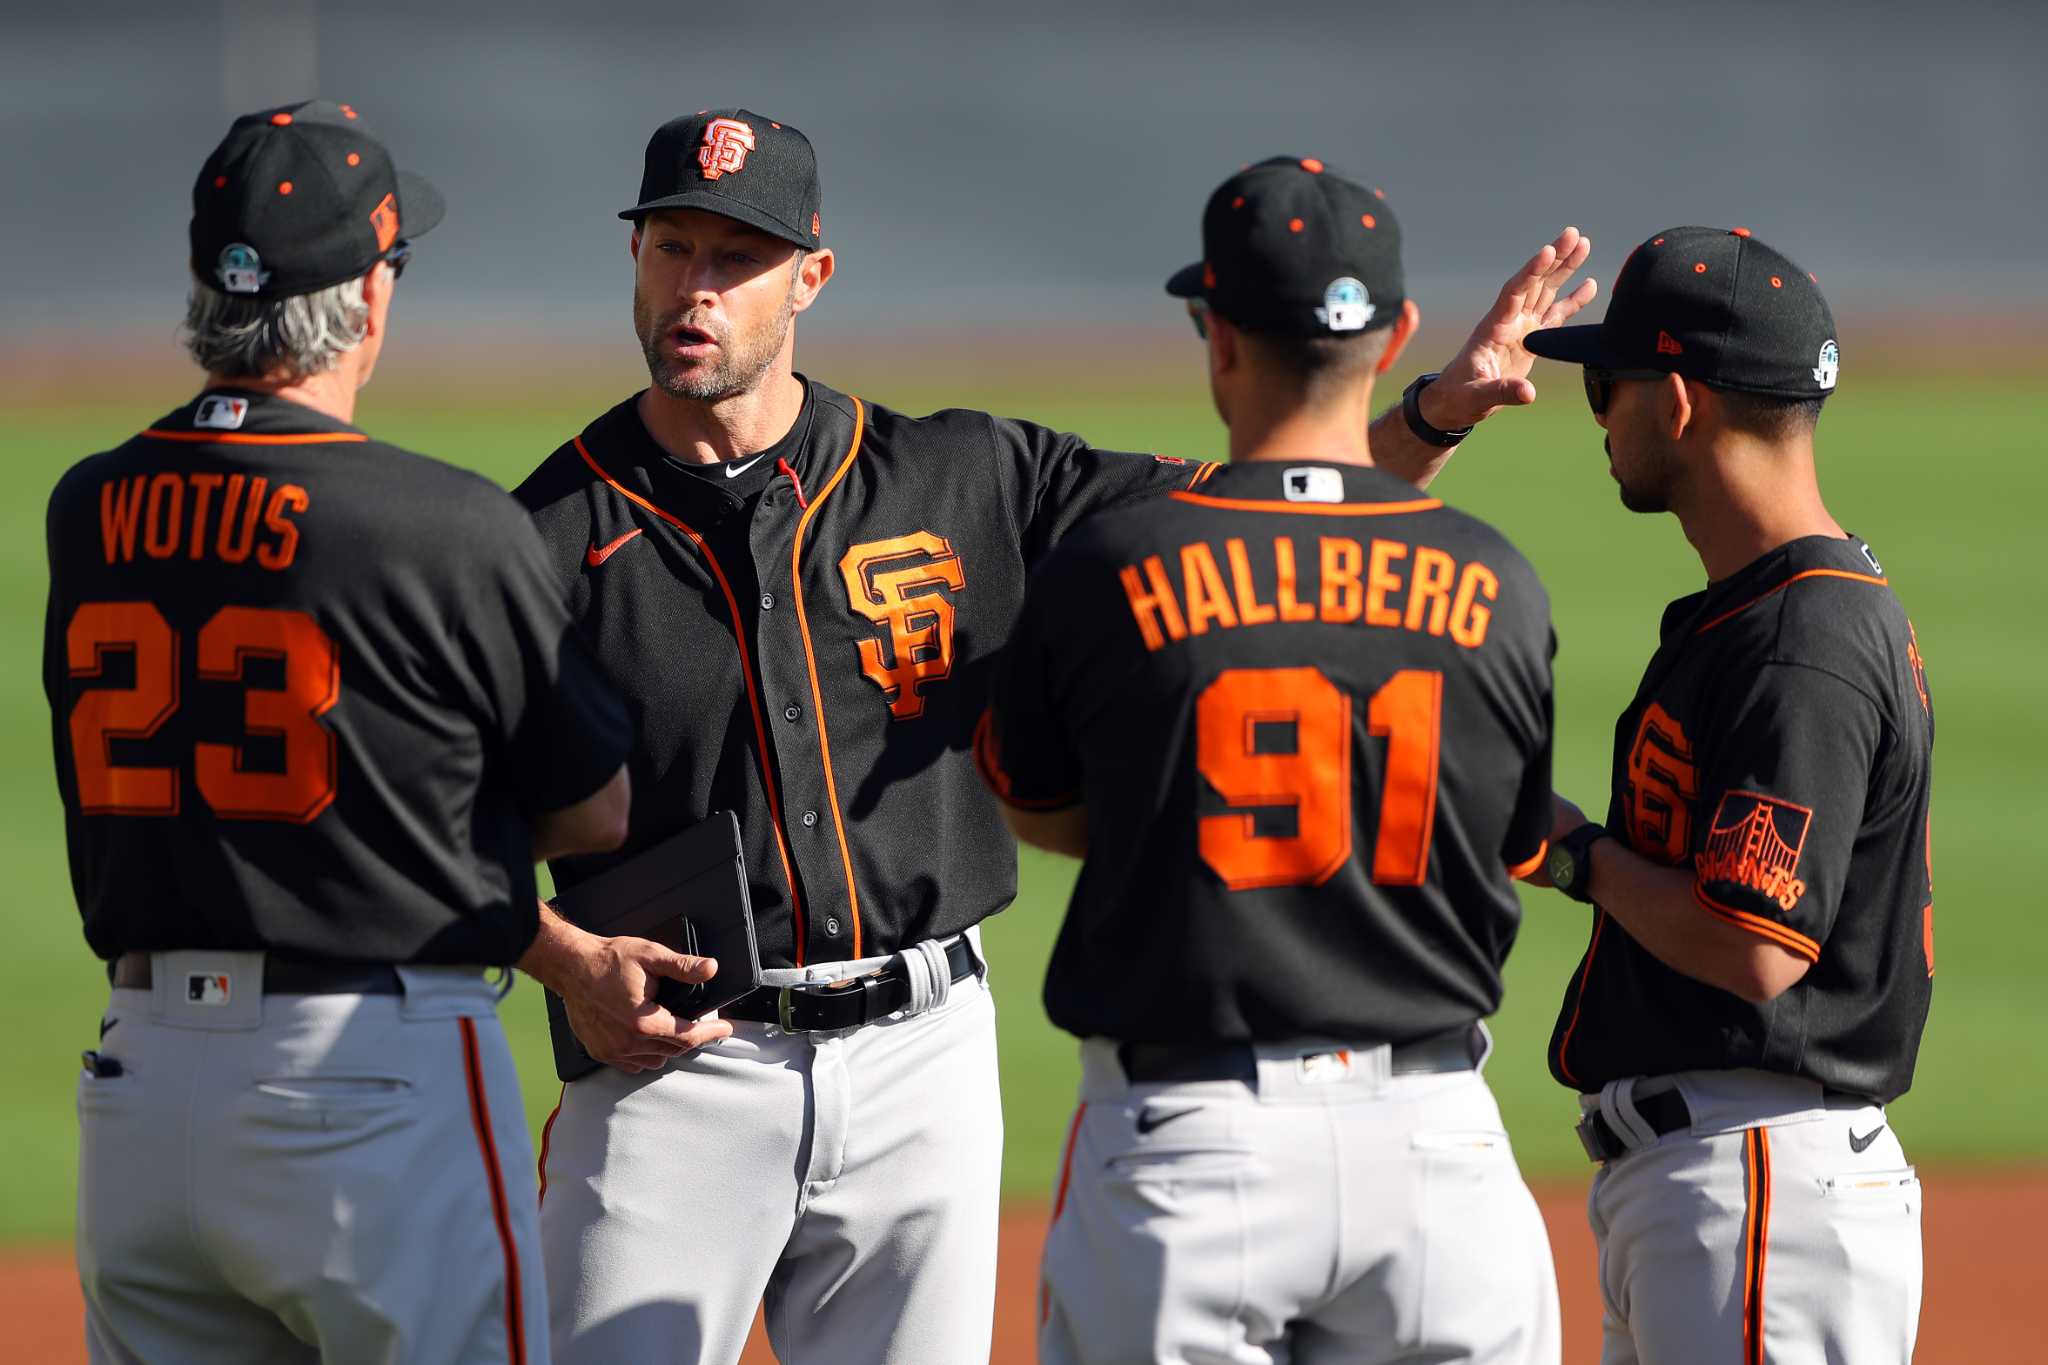 Giants' Gabe Kapler, Rangers' Bruce Bochy manage in different extremes